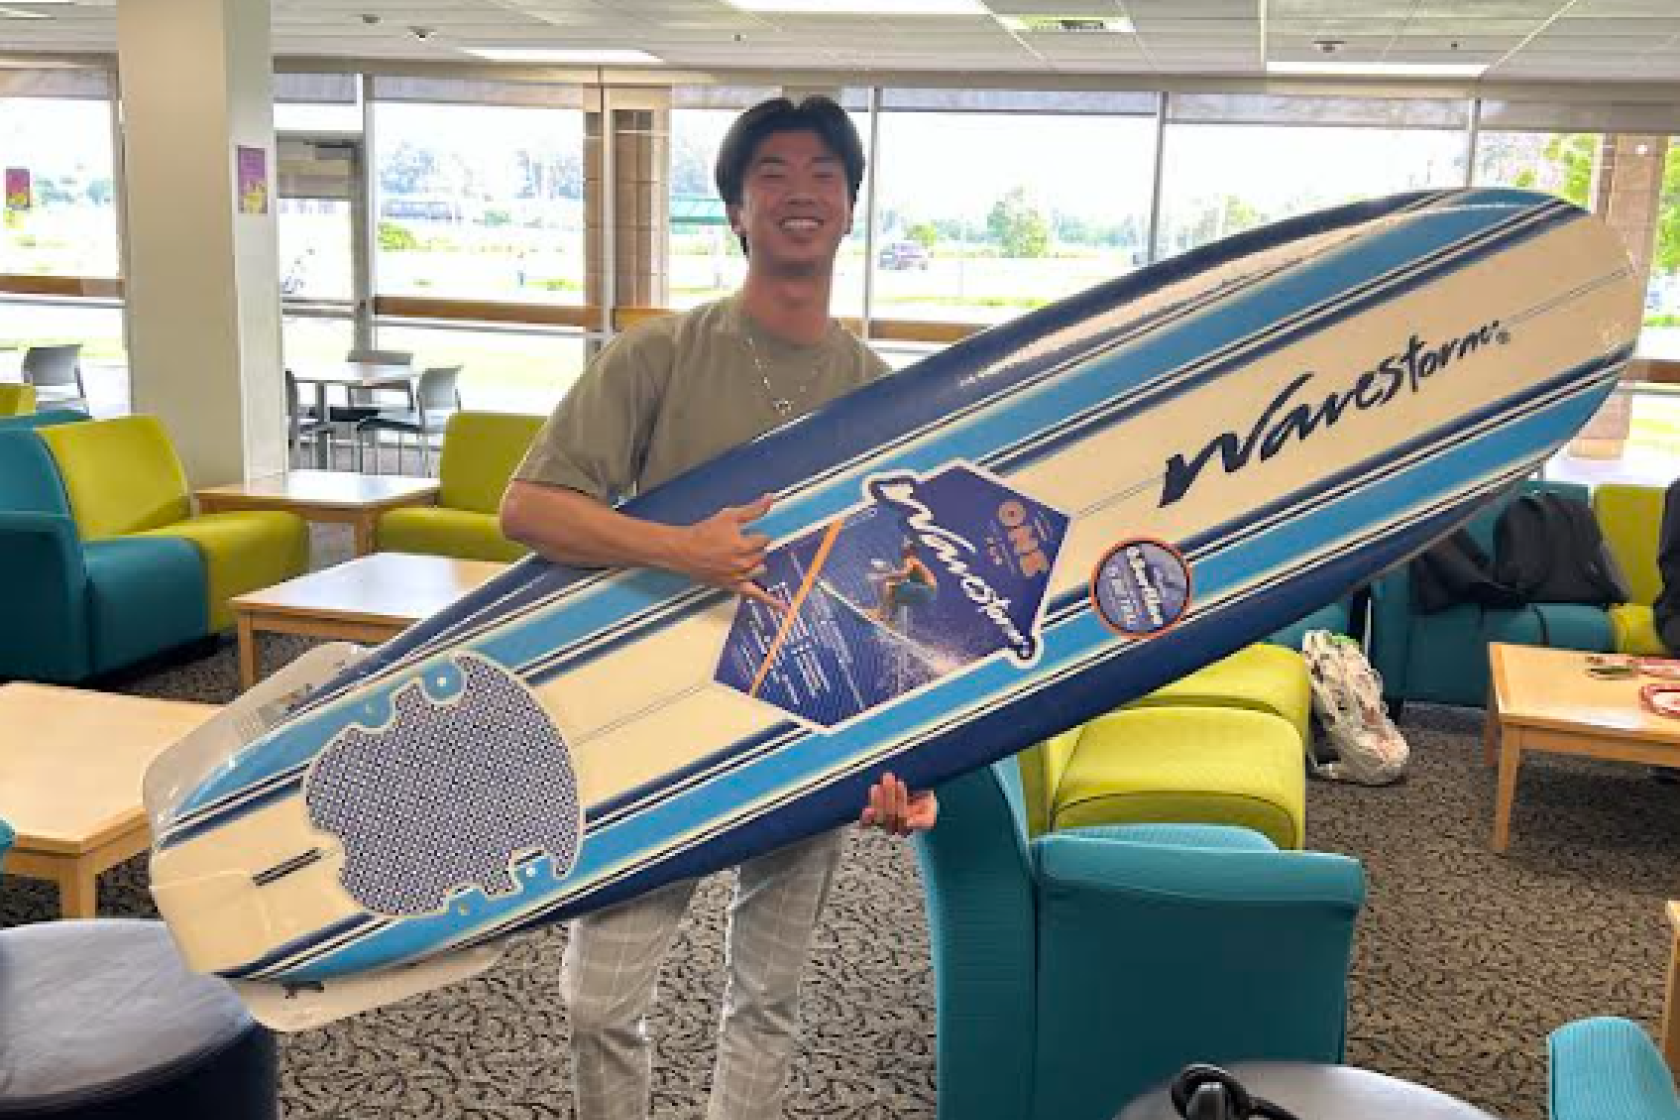 UCSB Energy Contest Surfboard Prize